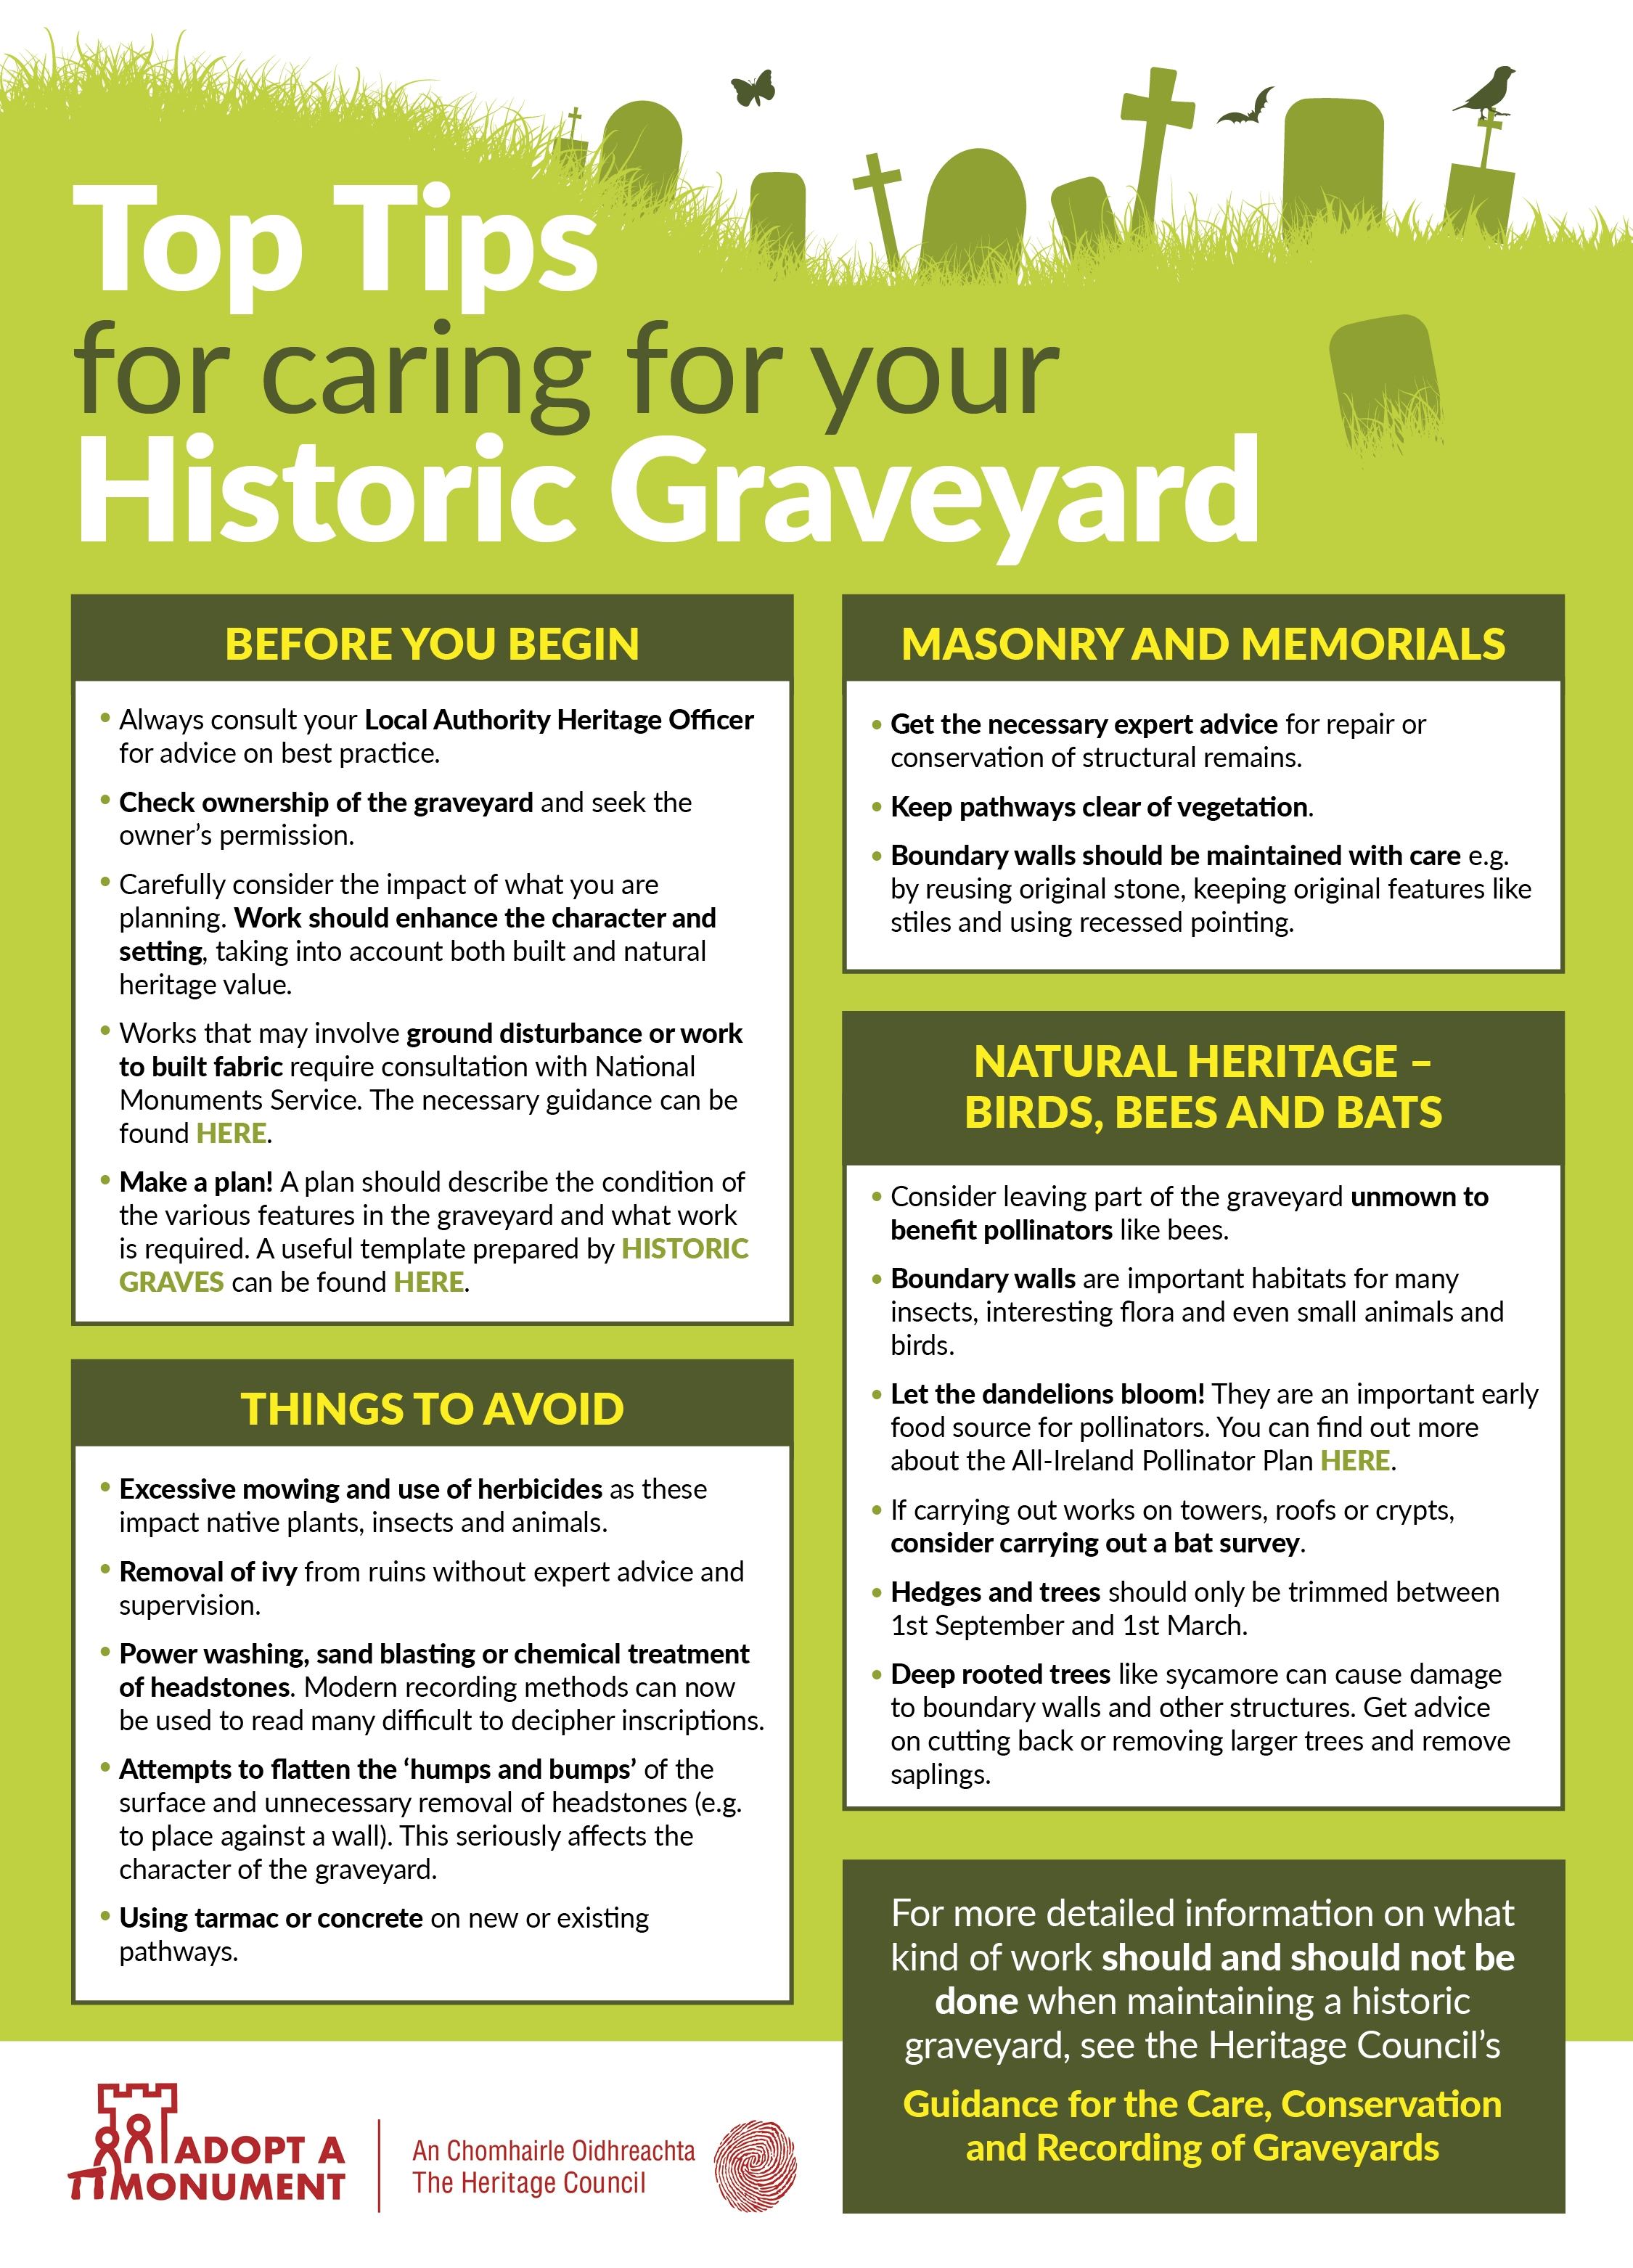 Top-Tips-for-Caring-for-Your-Graveyard.jpg#asset:6115